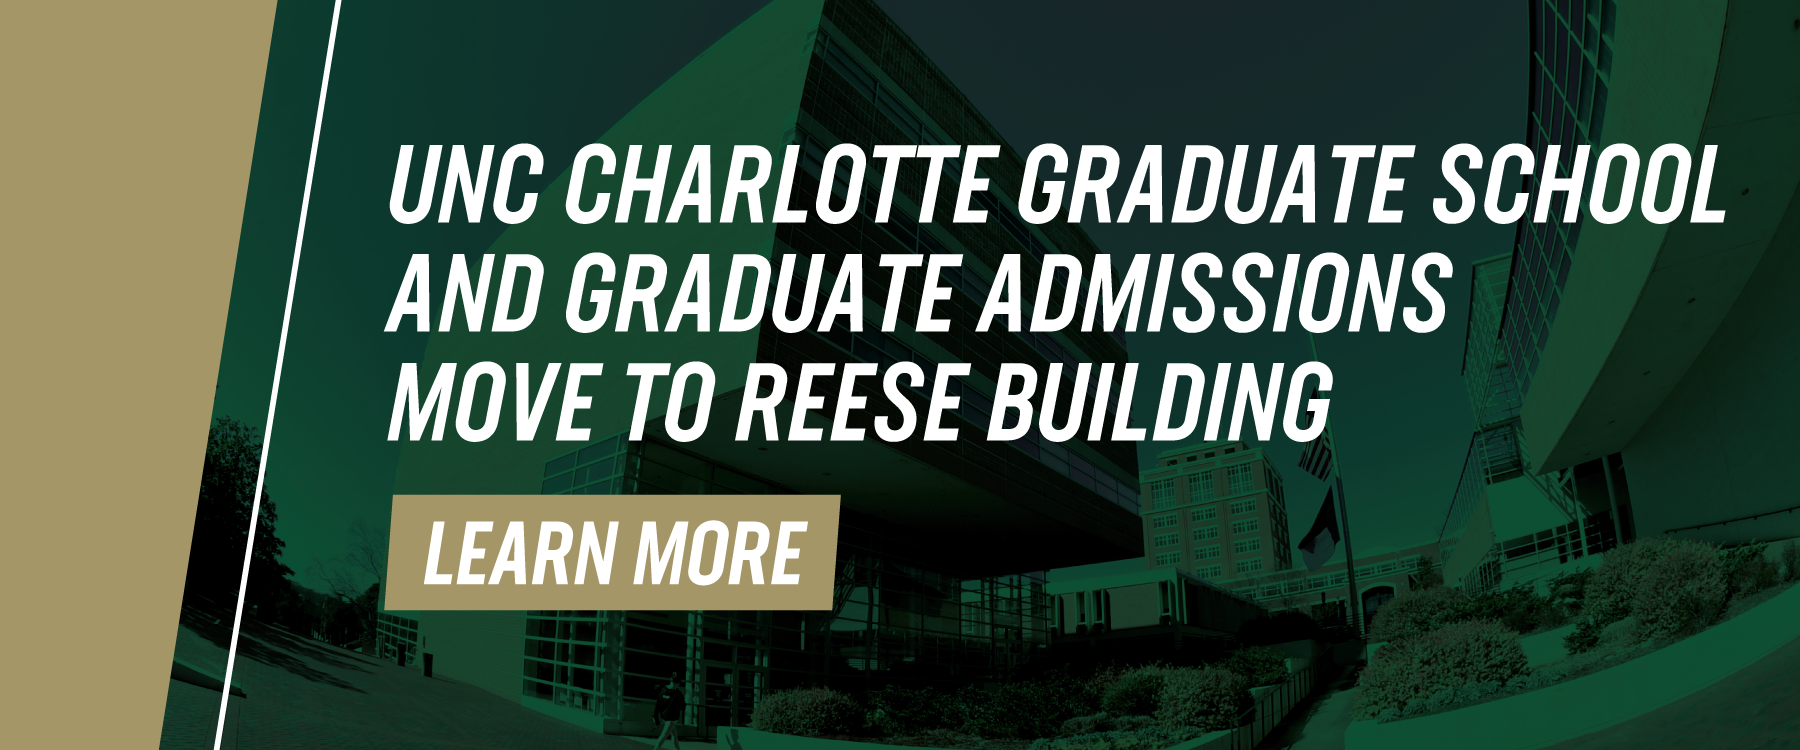 UNC Charlotte Graduate School and Graduate Admissions Move to Reese Building - Learn More